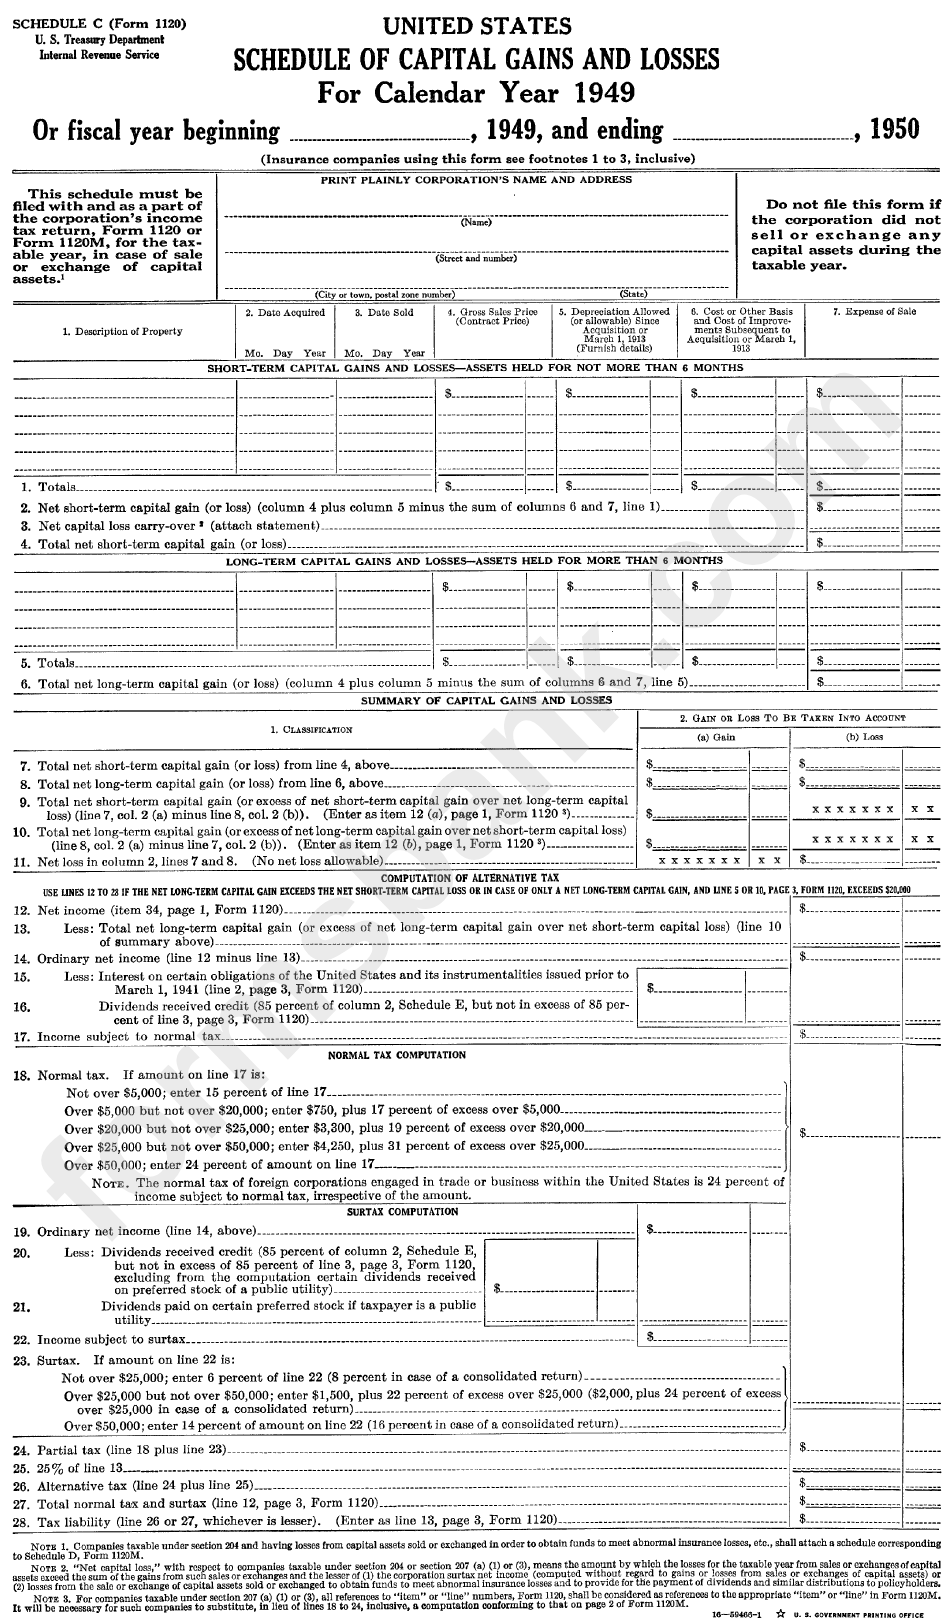 Form 1120 Schedule C - Schedule Of Capital Gains And Losses - 1949